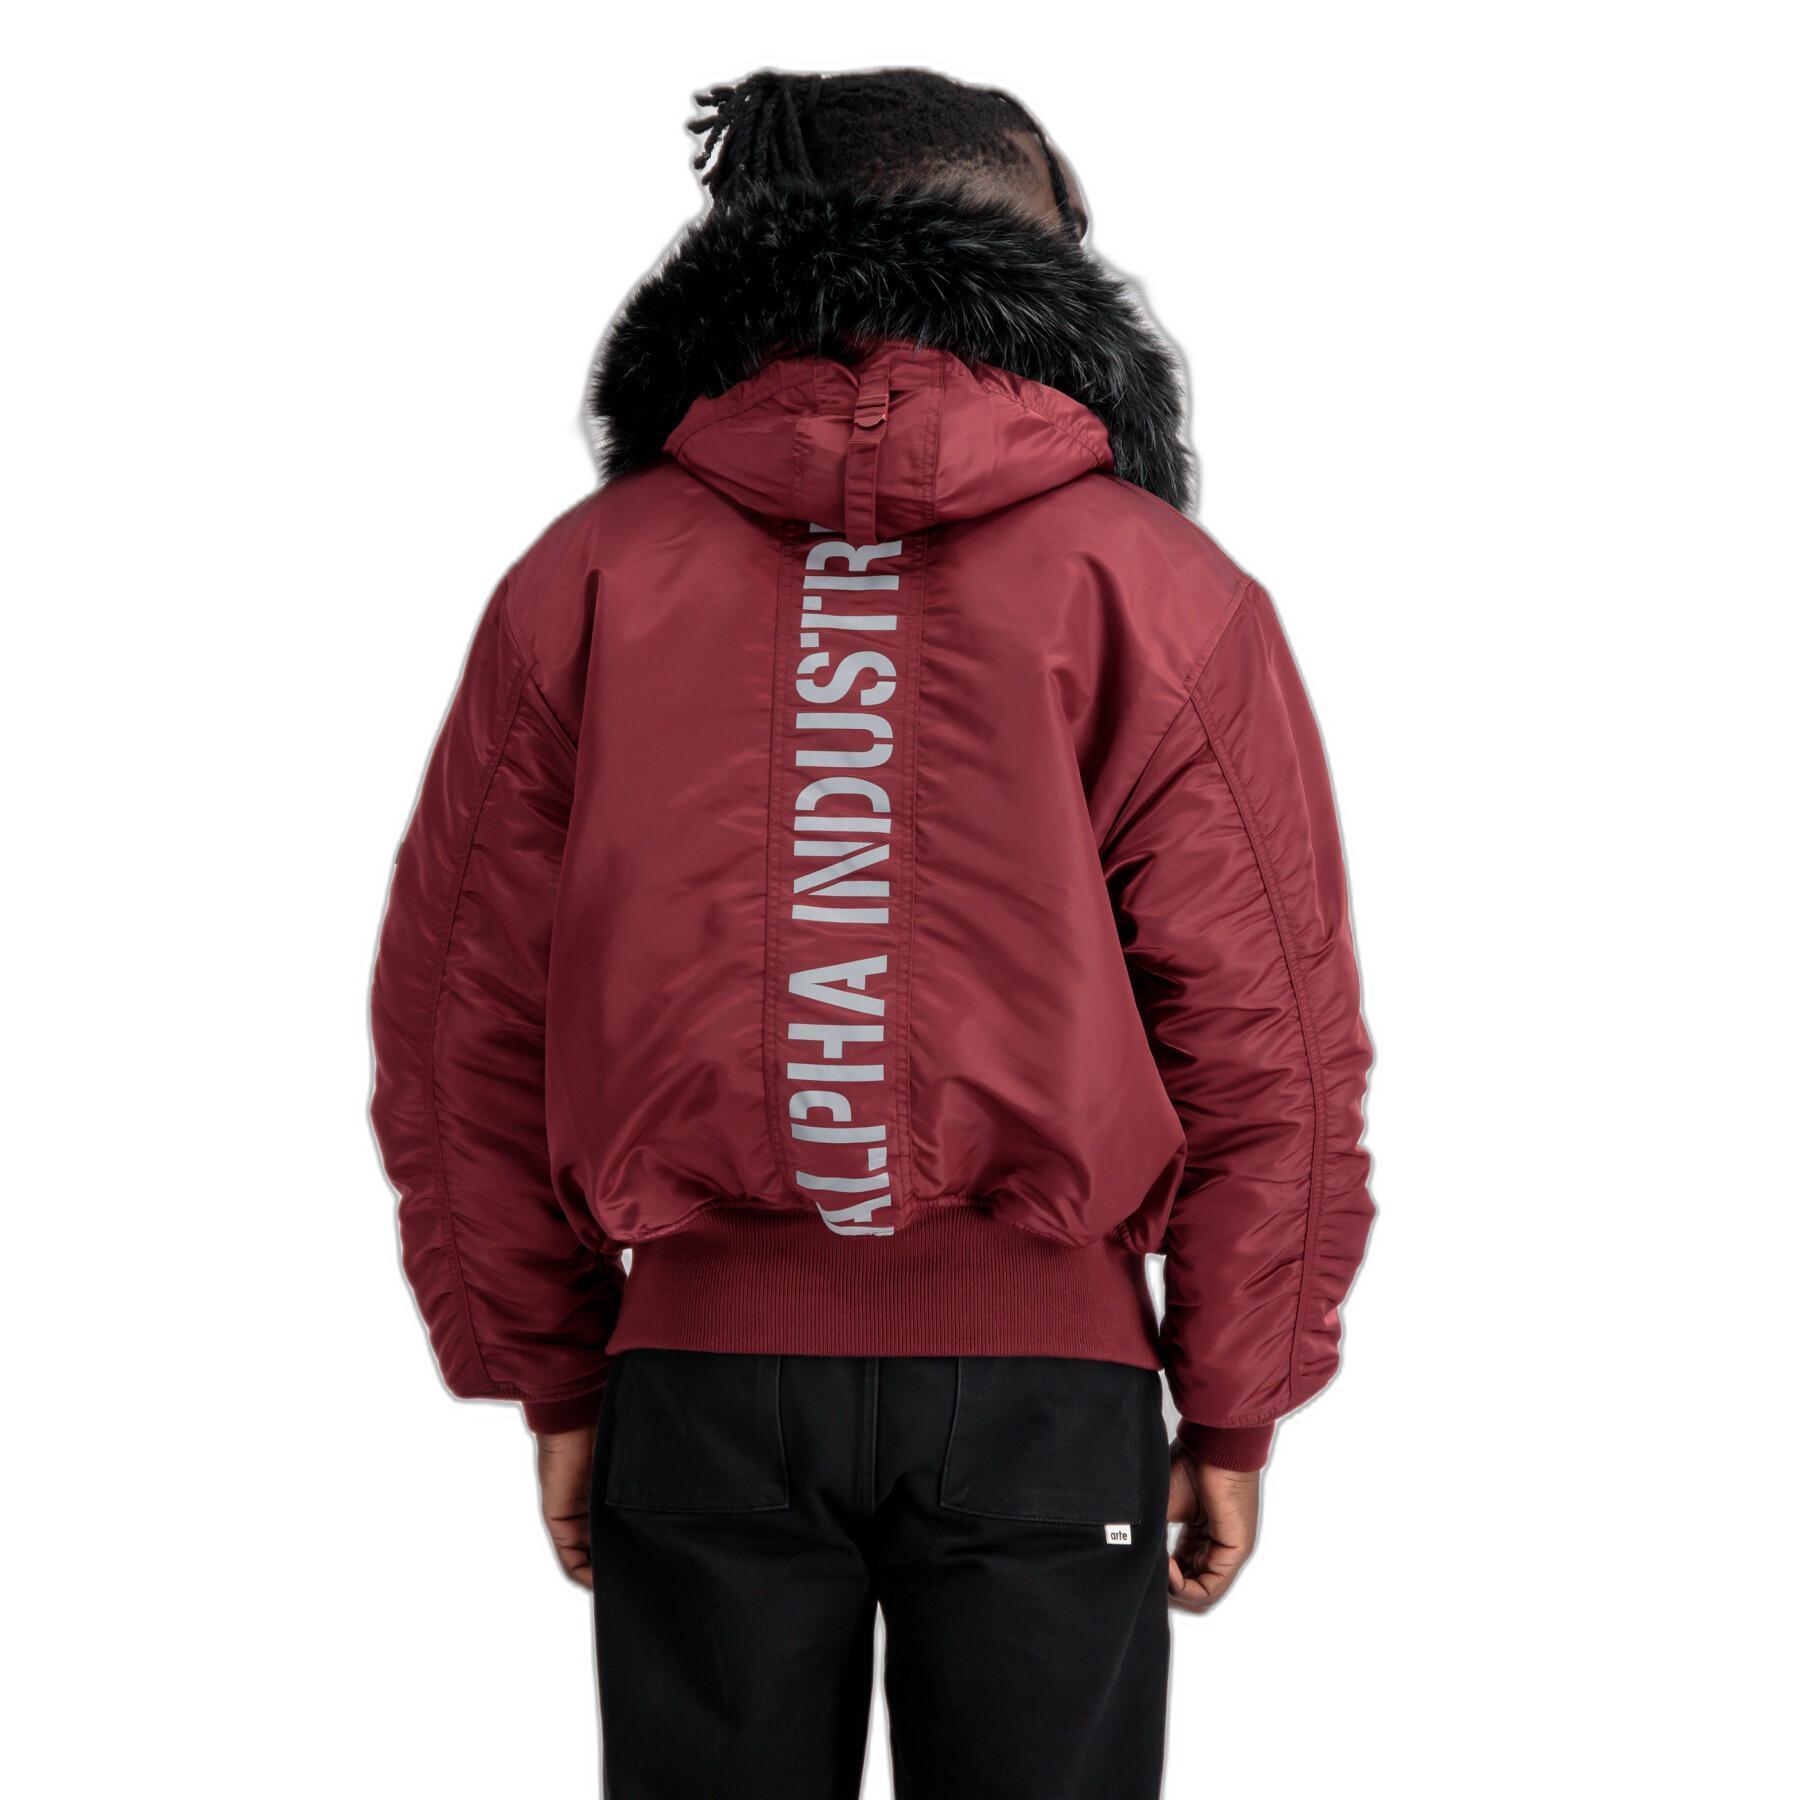 Customized hooded bomber Alpha Industries 45P